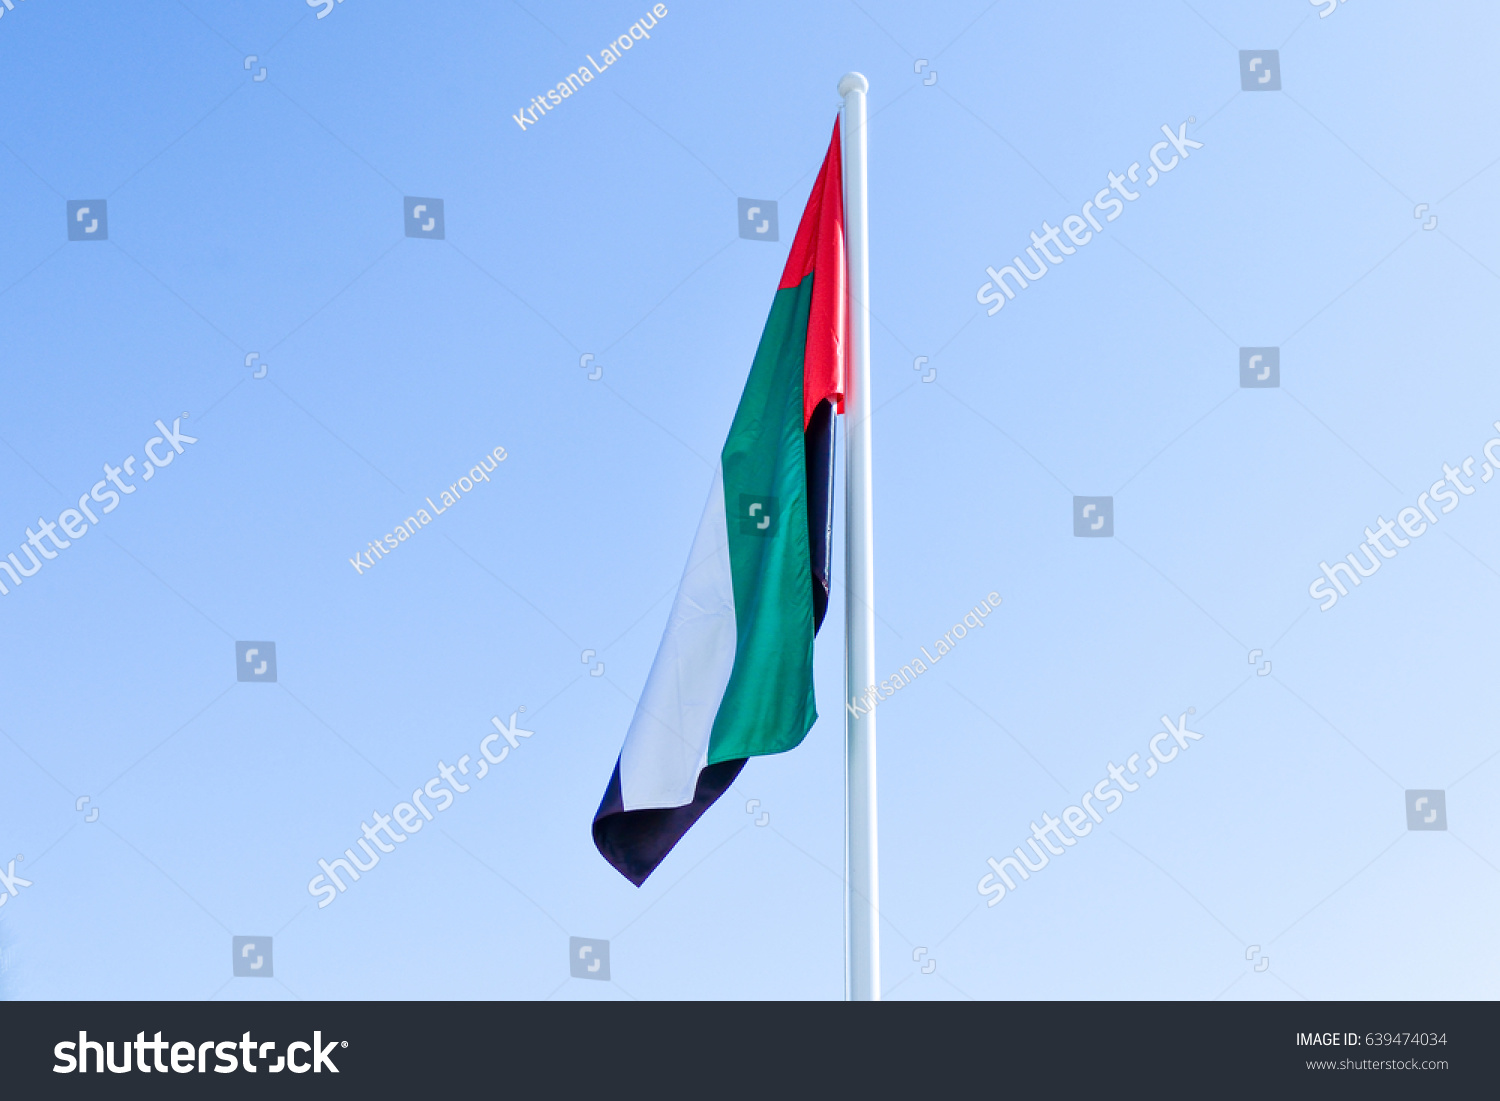 A United Arab Emirates flag flying against clean and tranquil sky. #639474034